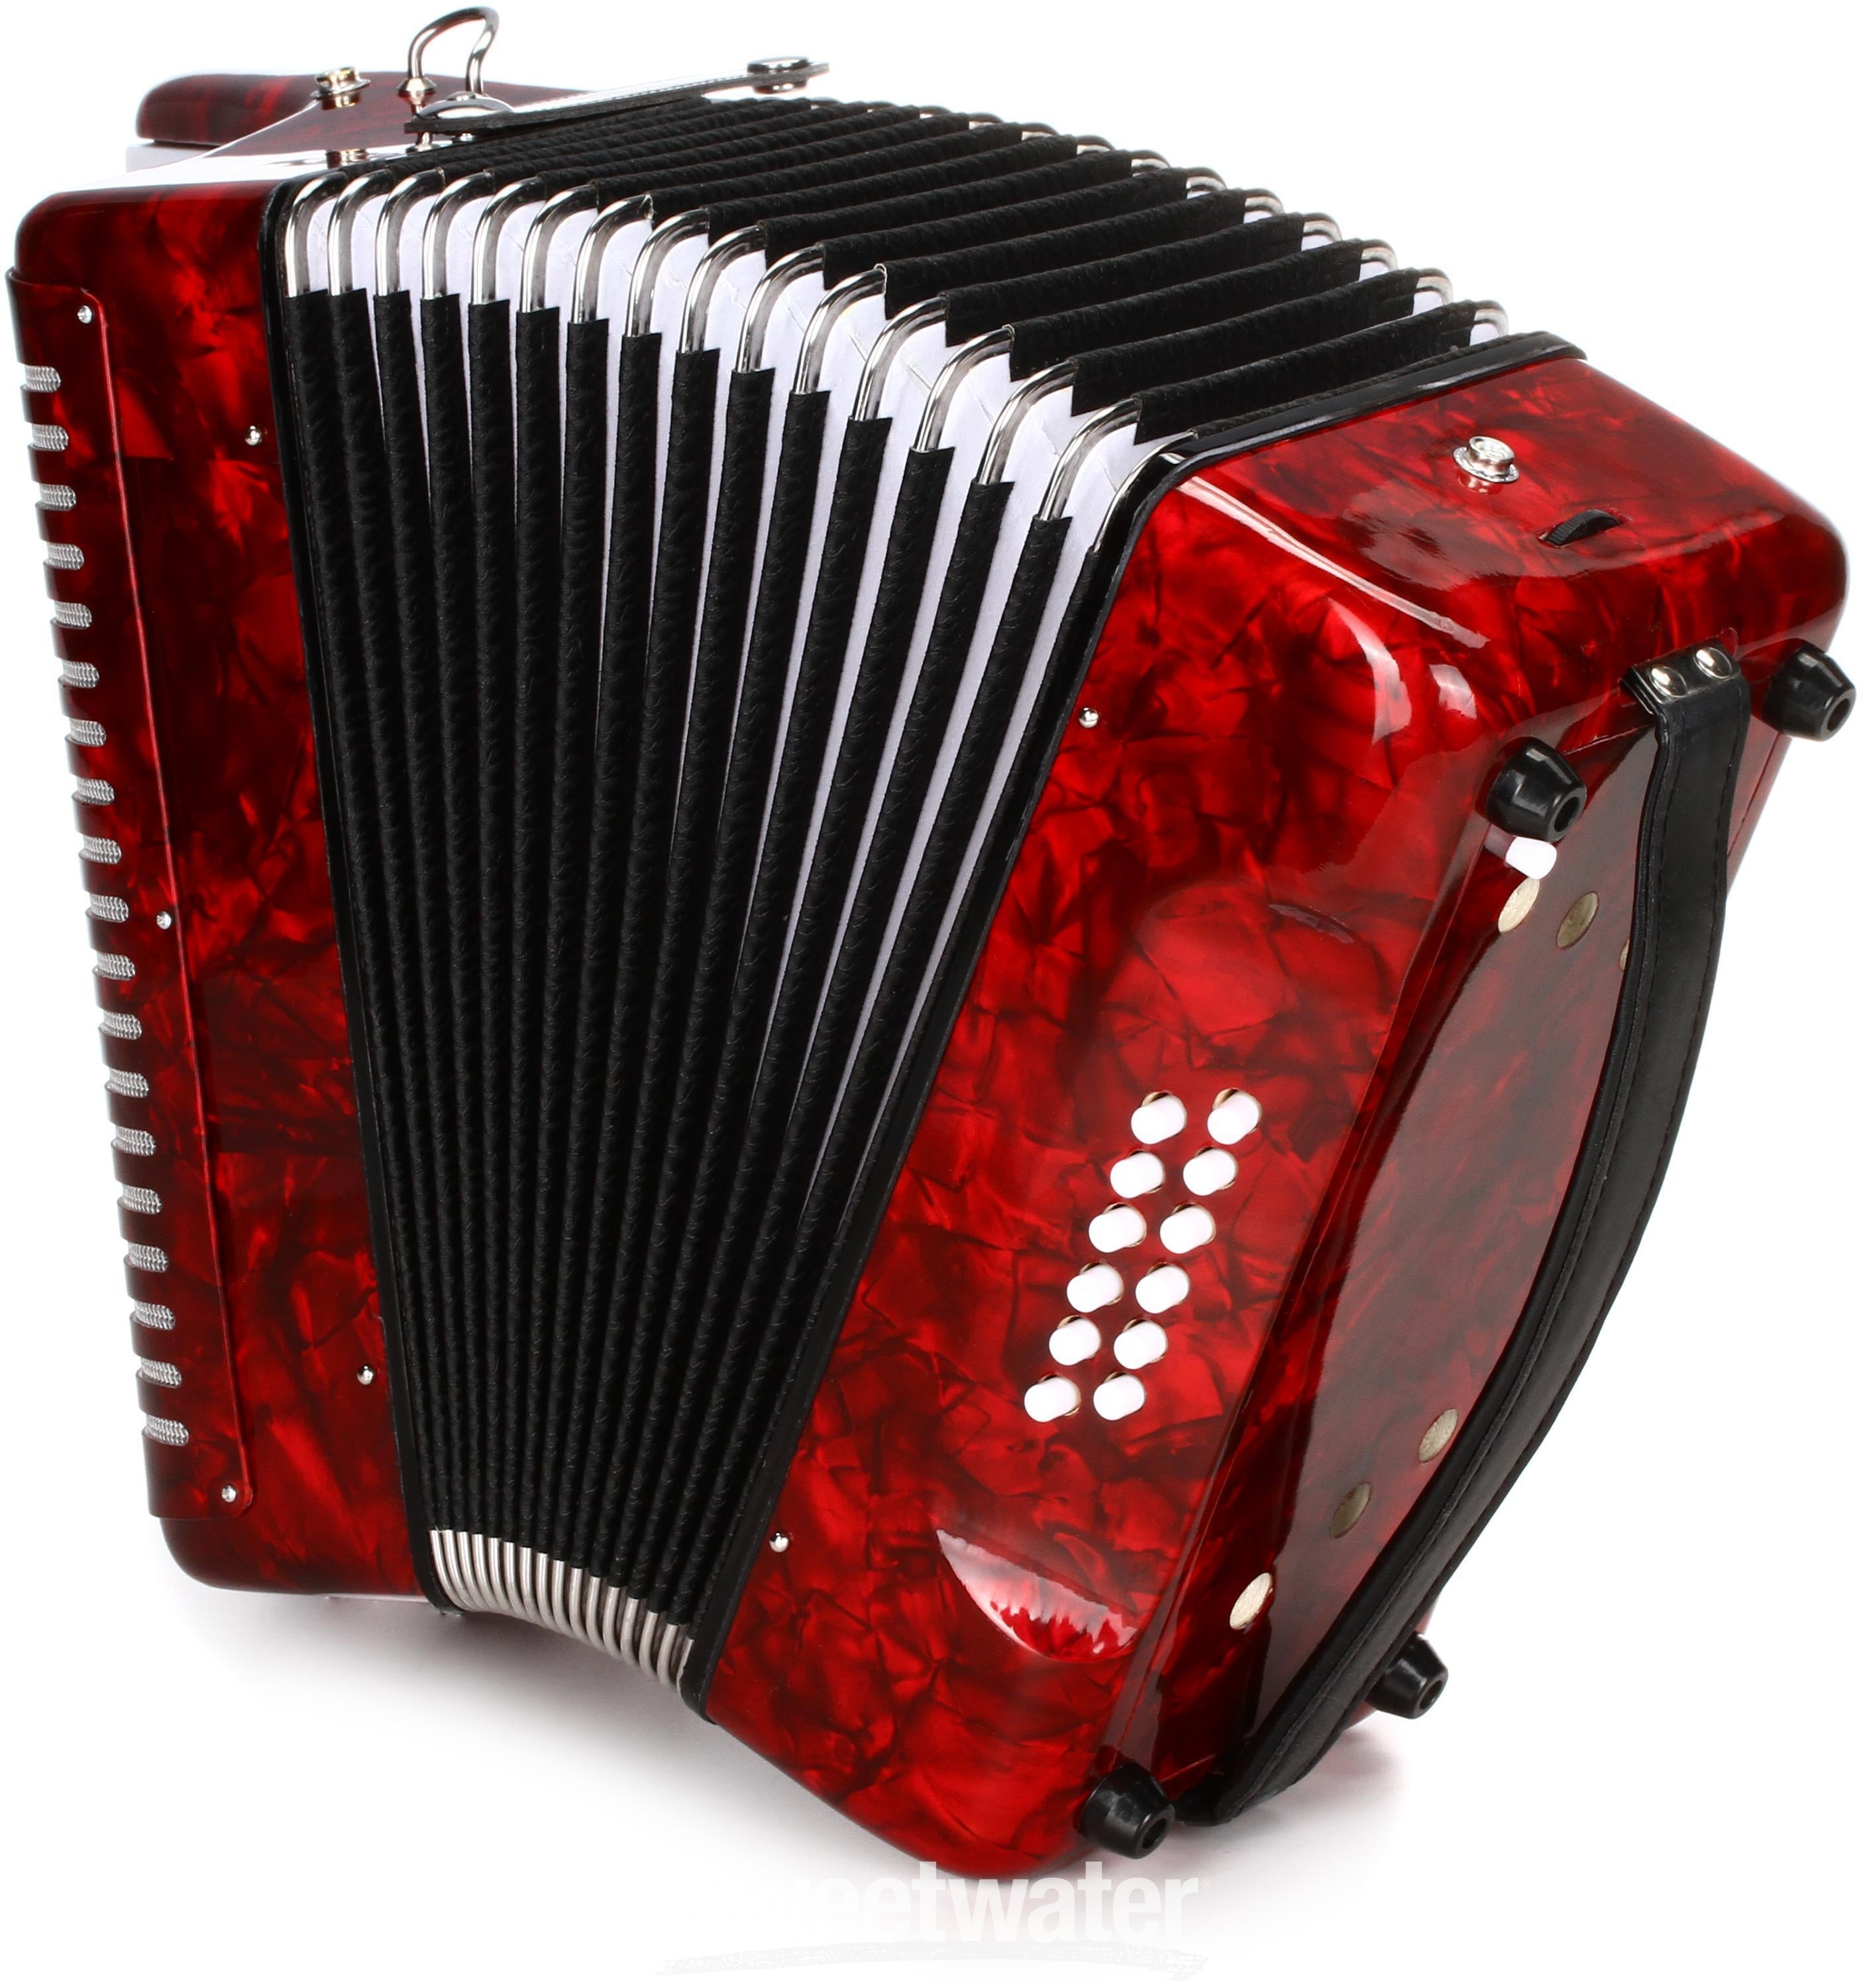 Hohner Hohnica 1303 12 Bass Piano Accordion - Pearl Red | Sweetwater